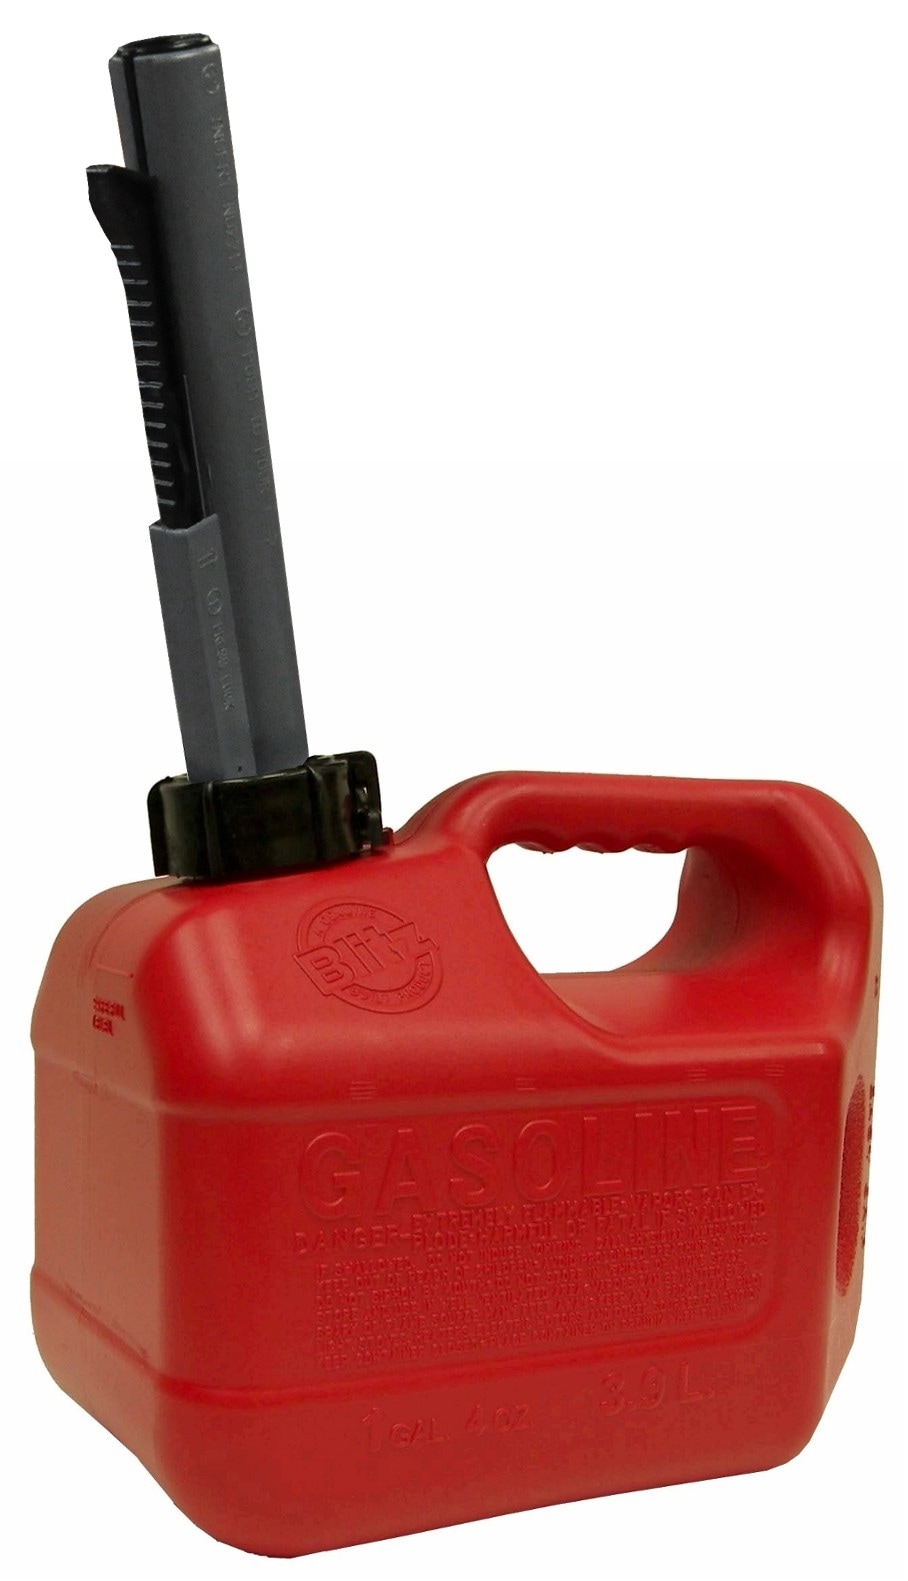 Blitz 1 Gallon 4oz Gas Fuel Can With Self Vented Fixed Spout 50805 for sale online 